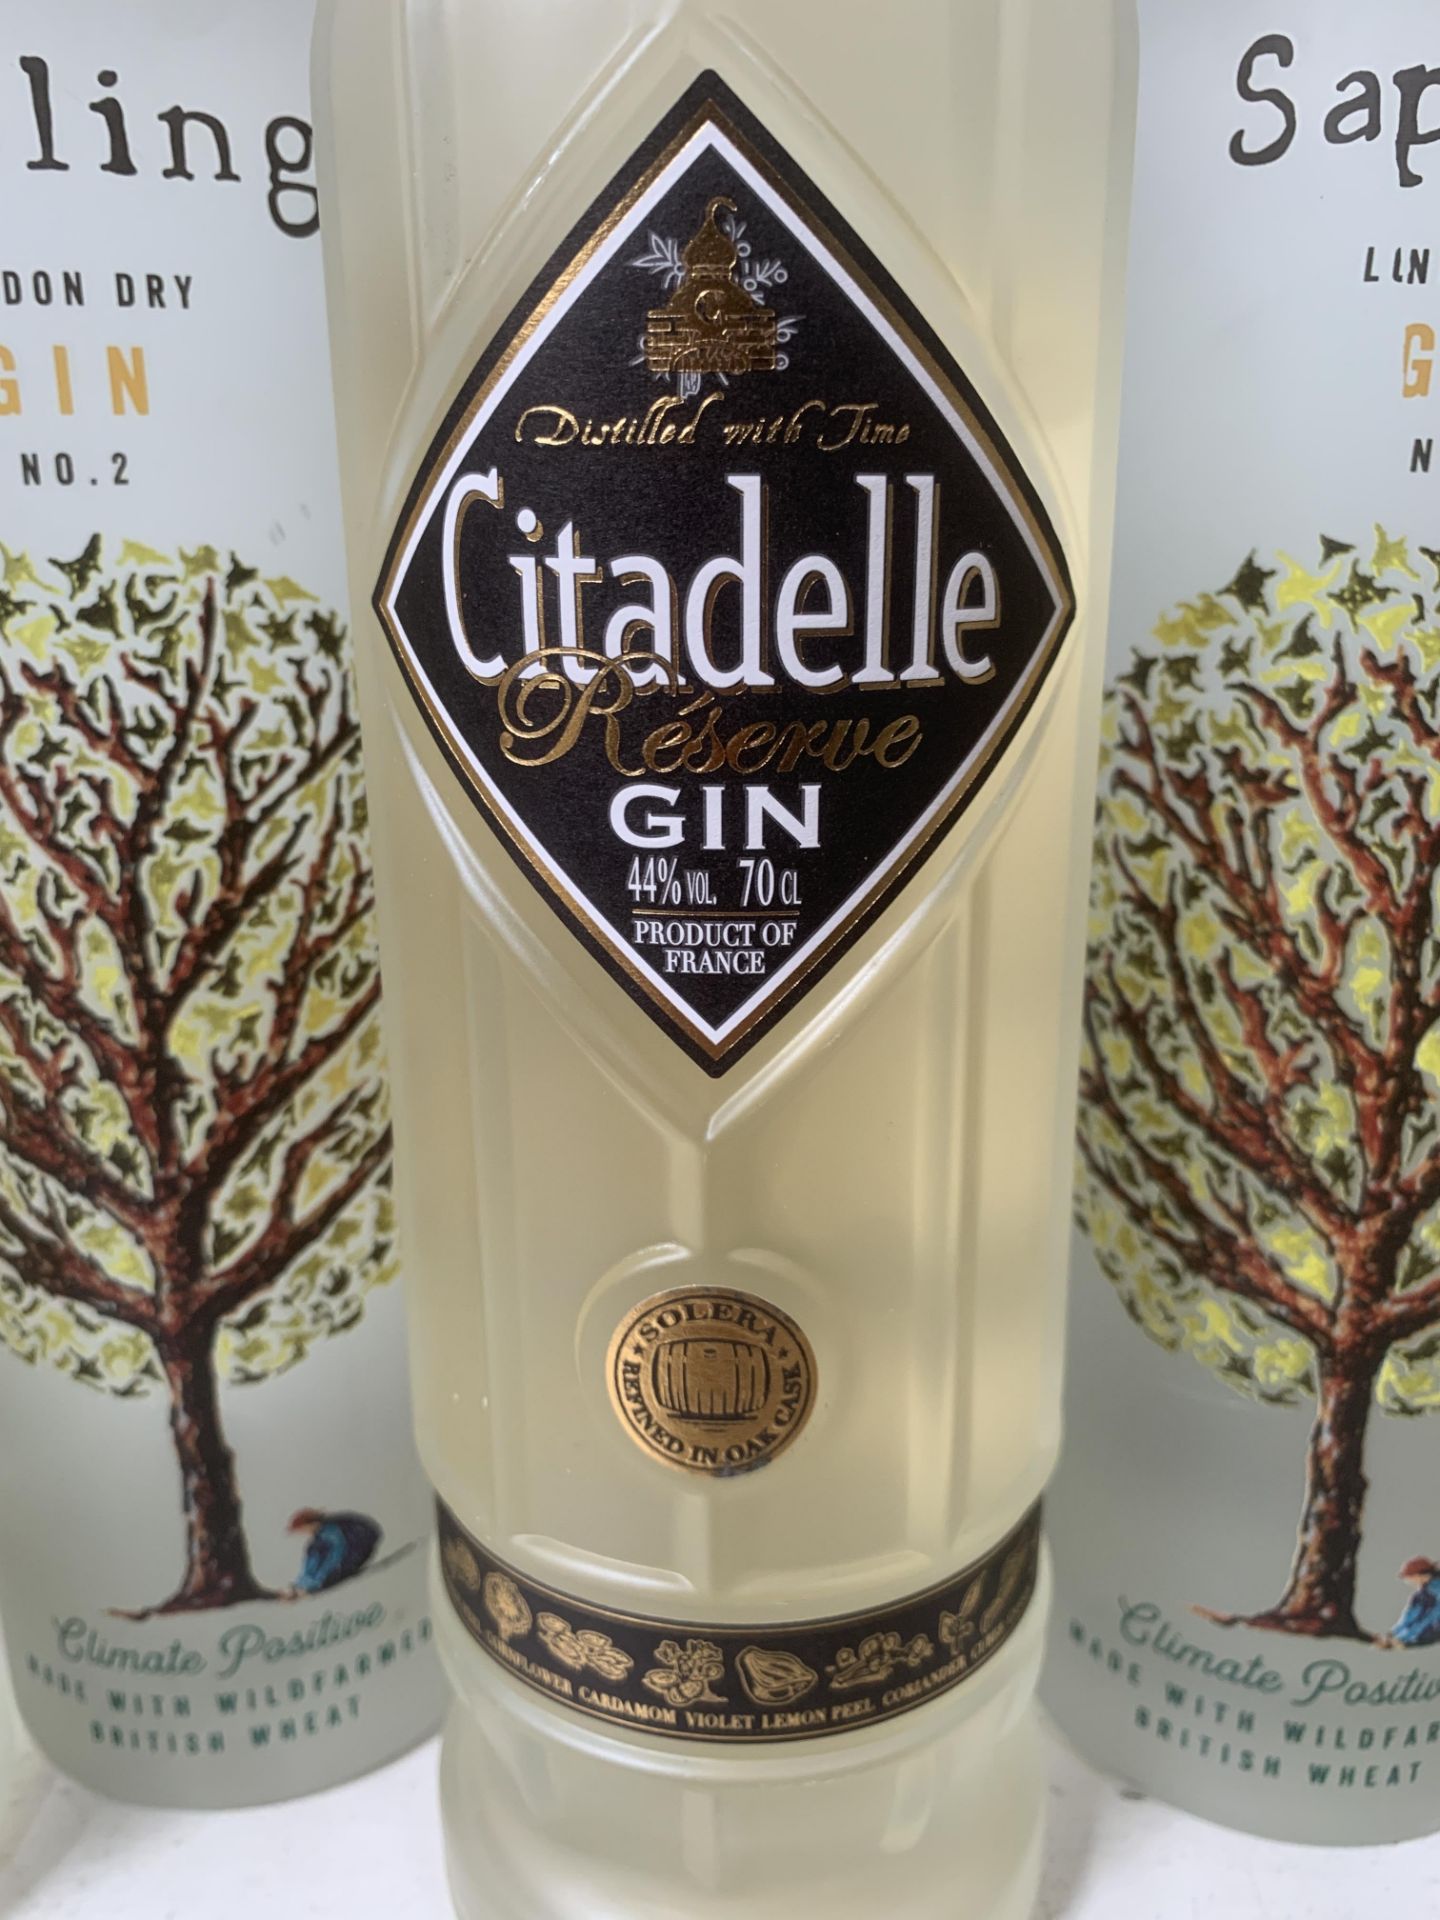 5x Bottles of Gin; 3x 3x Citadelle Reserved 44%, 70cl and 2x Sapling London Dry Gin 40%, 70cl - Image 3 of 5